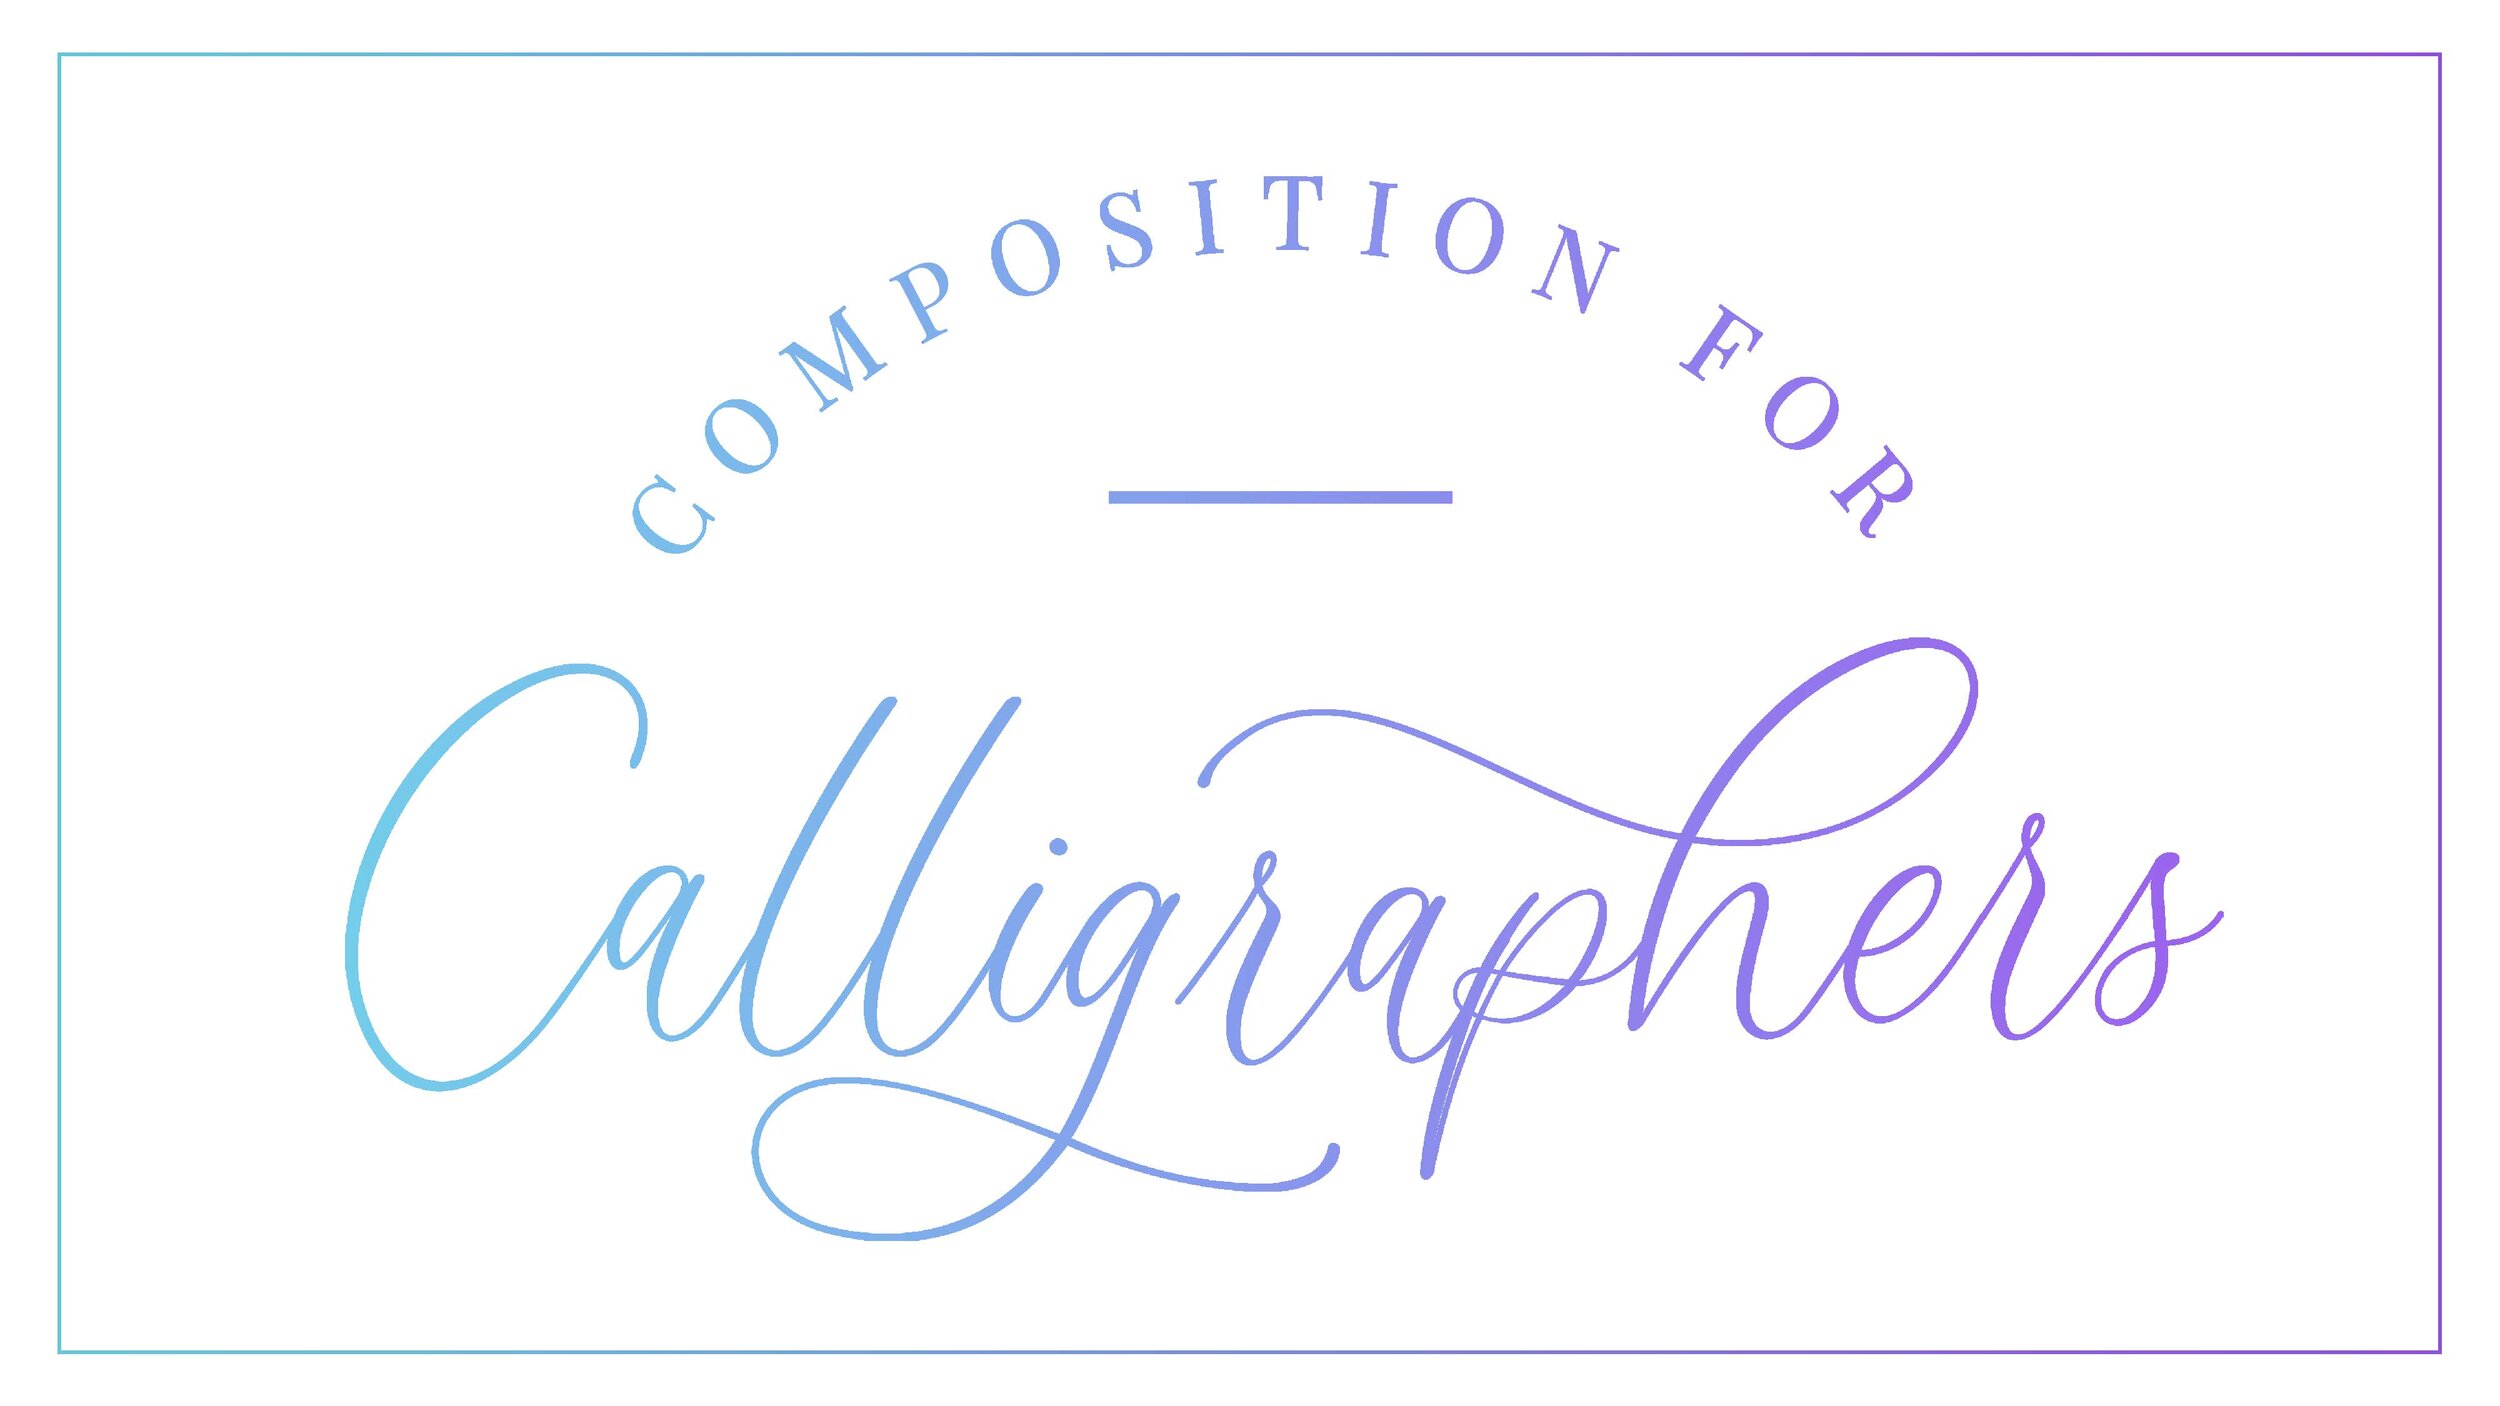 Calligraphy For Kids: 3 Free Ideas To Try — Loveleigh Loops